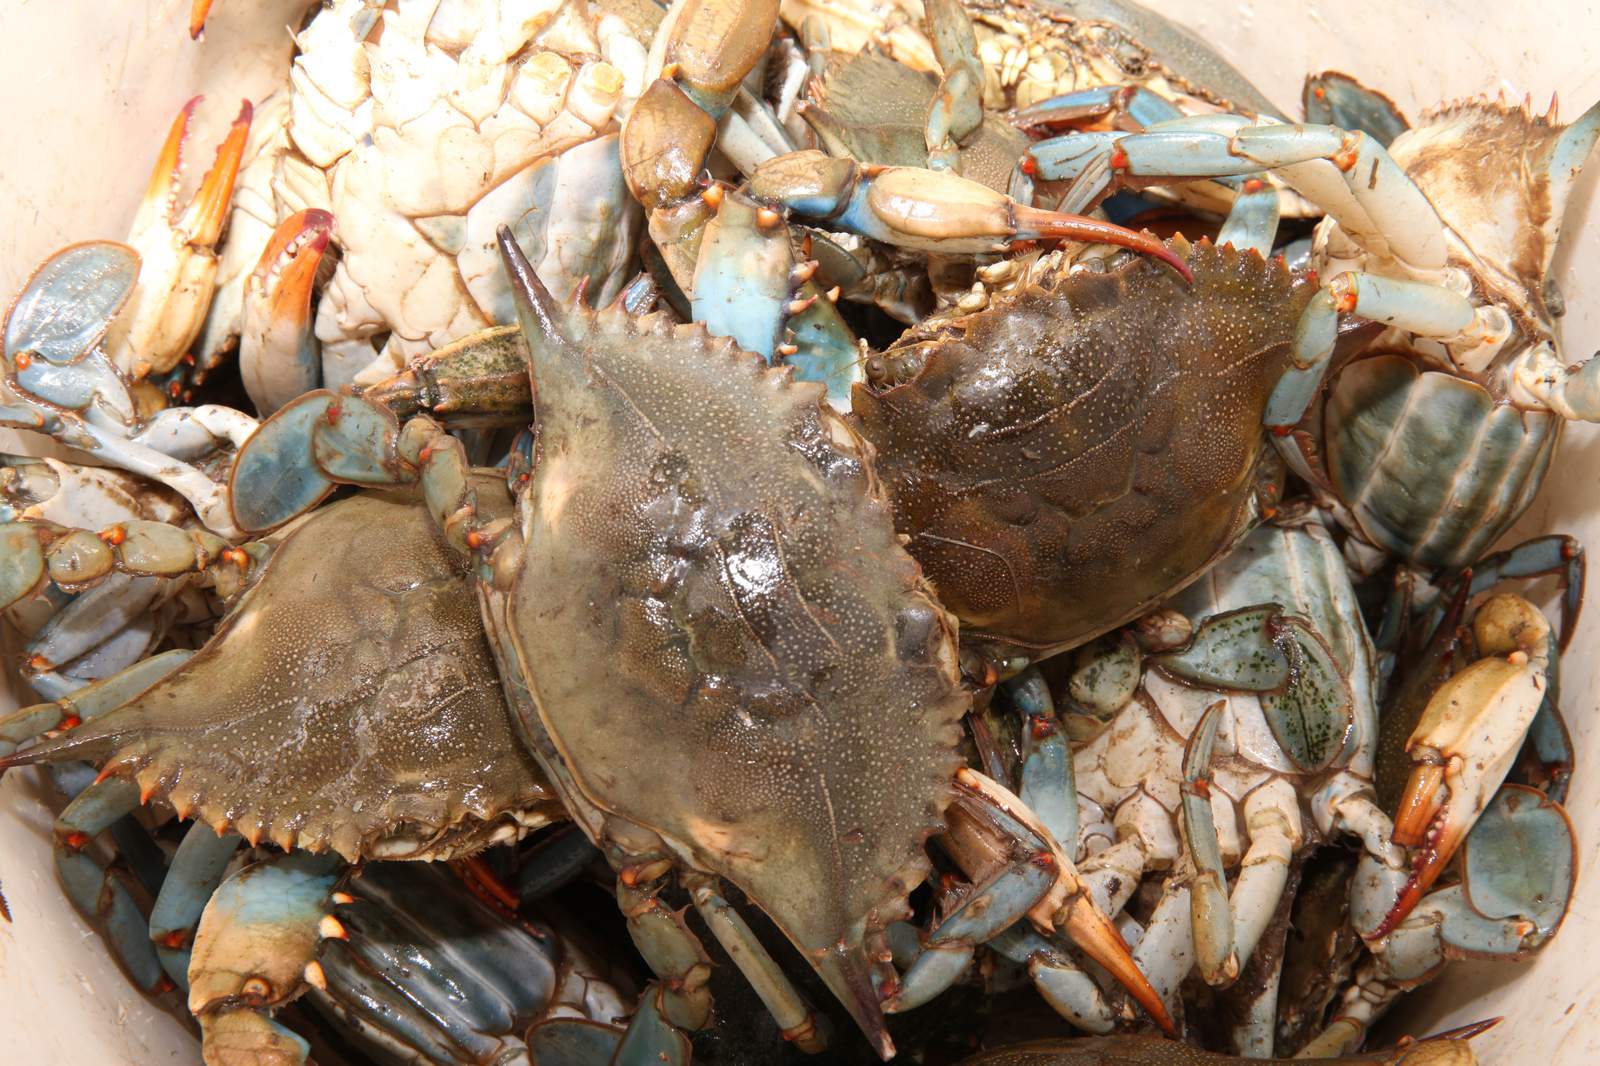 Devil Crab to become the official crustacean of Florida